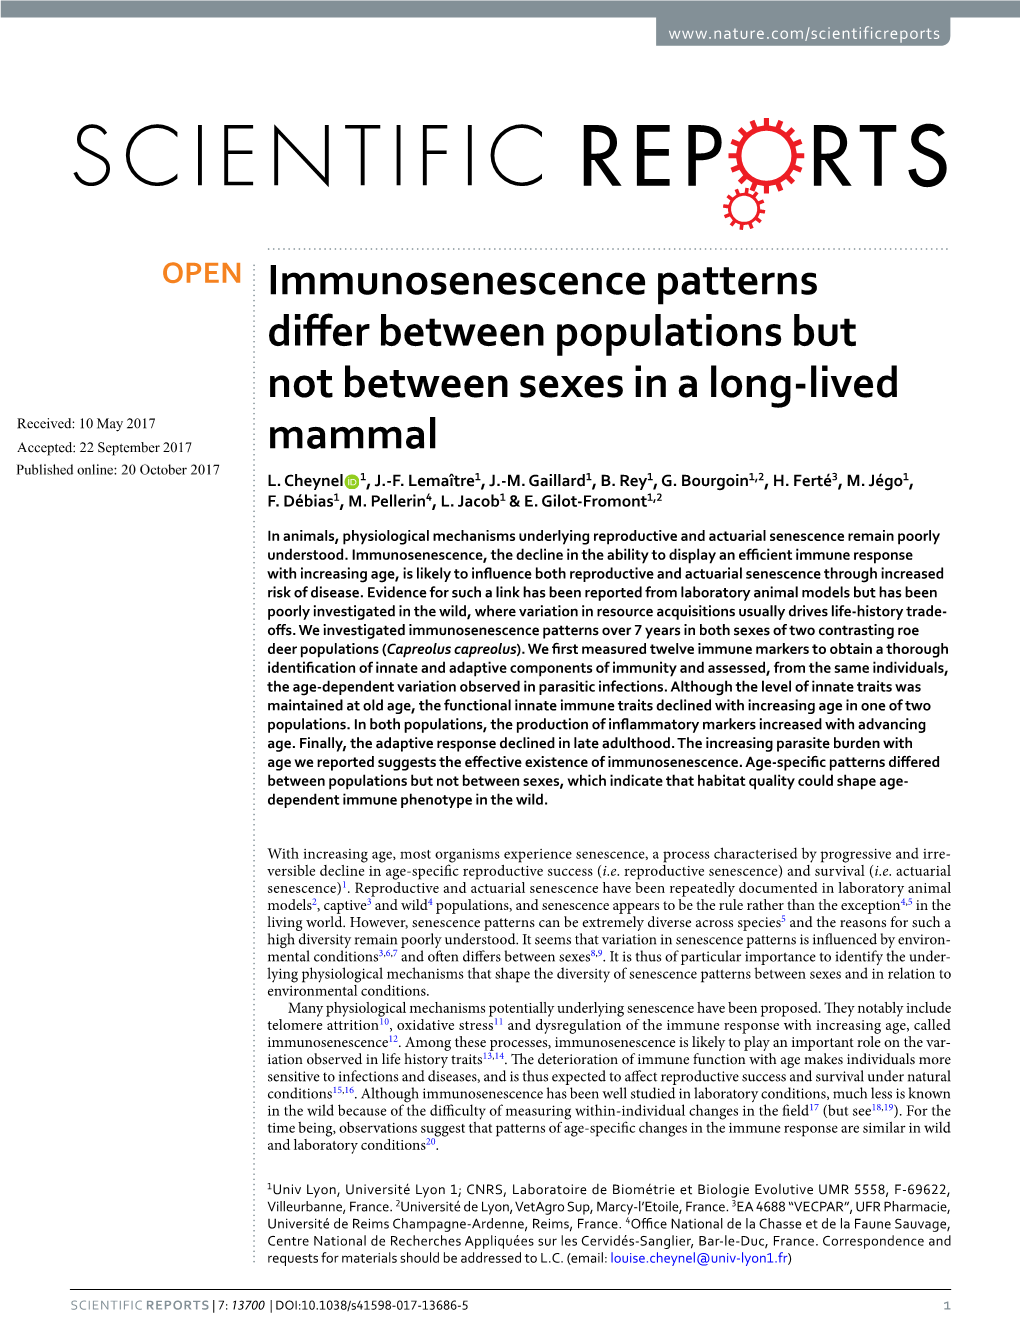 Immunosenescence Patterns Differ Between Populations but Not Between Sexes in a Long-Lived Mammal